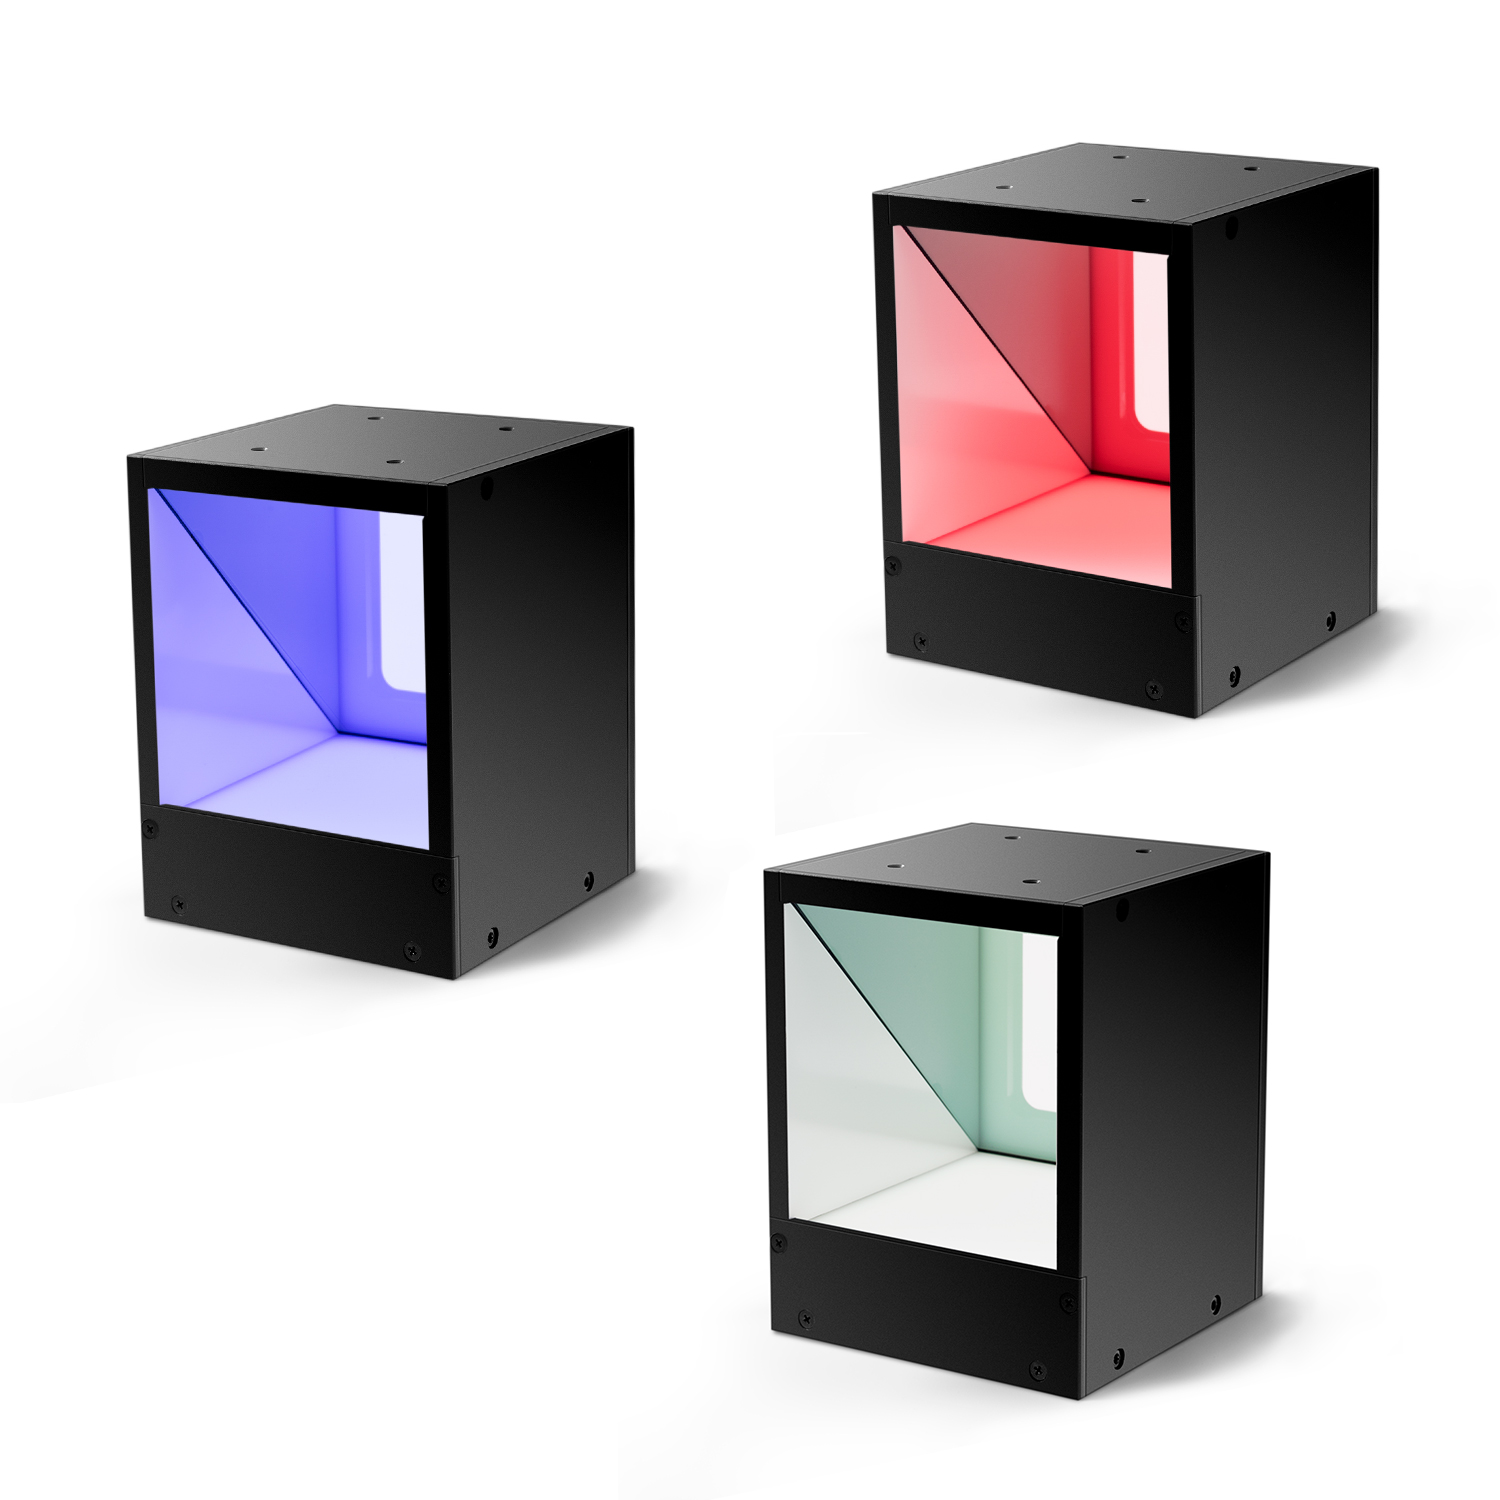 Coaxial Epi-Illumination (White/Red/Blue) for Uneven Reflection Reduction